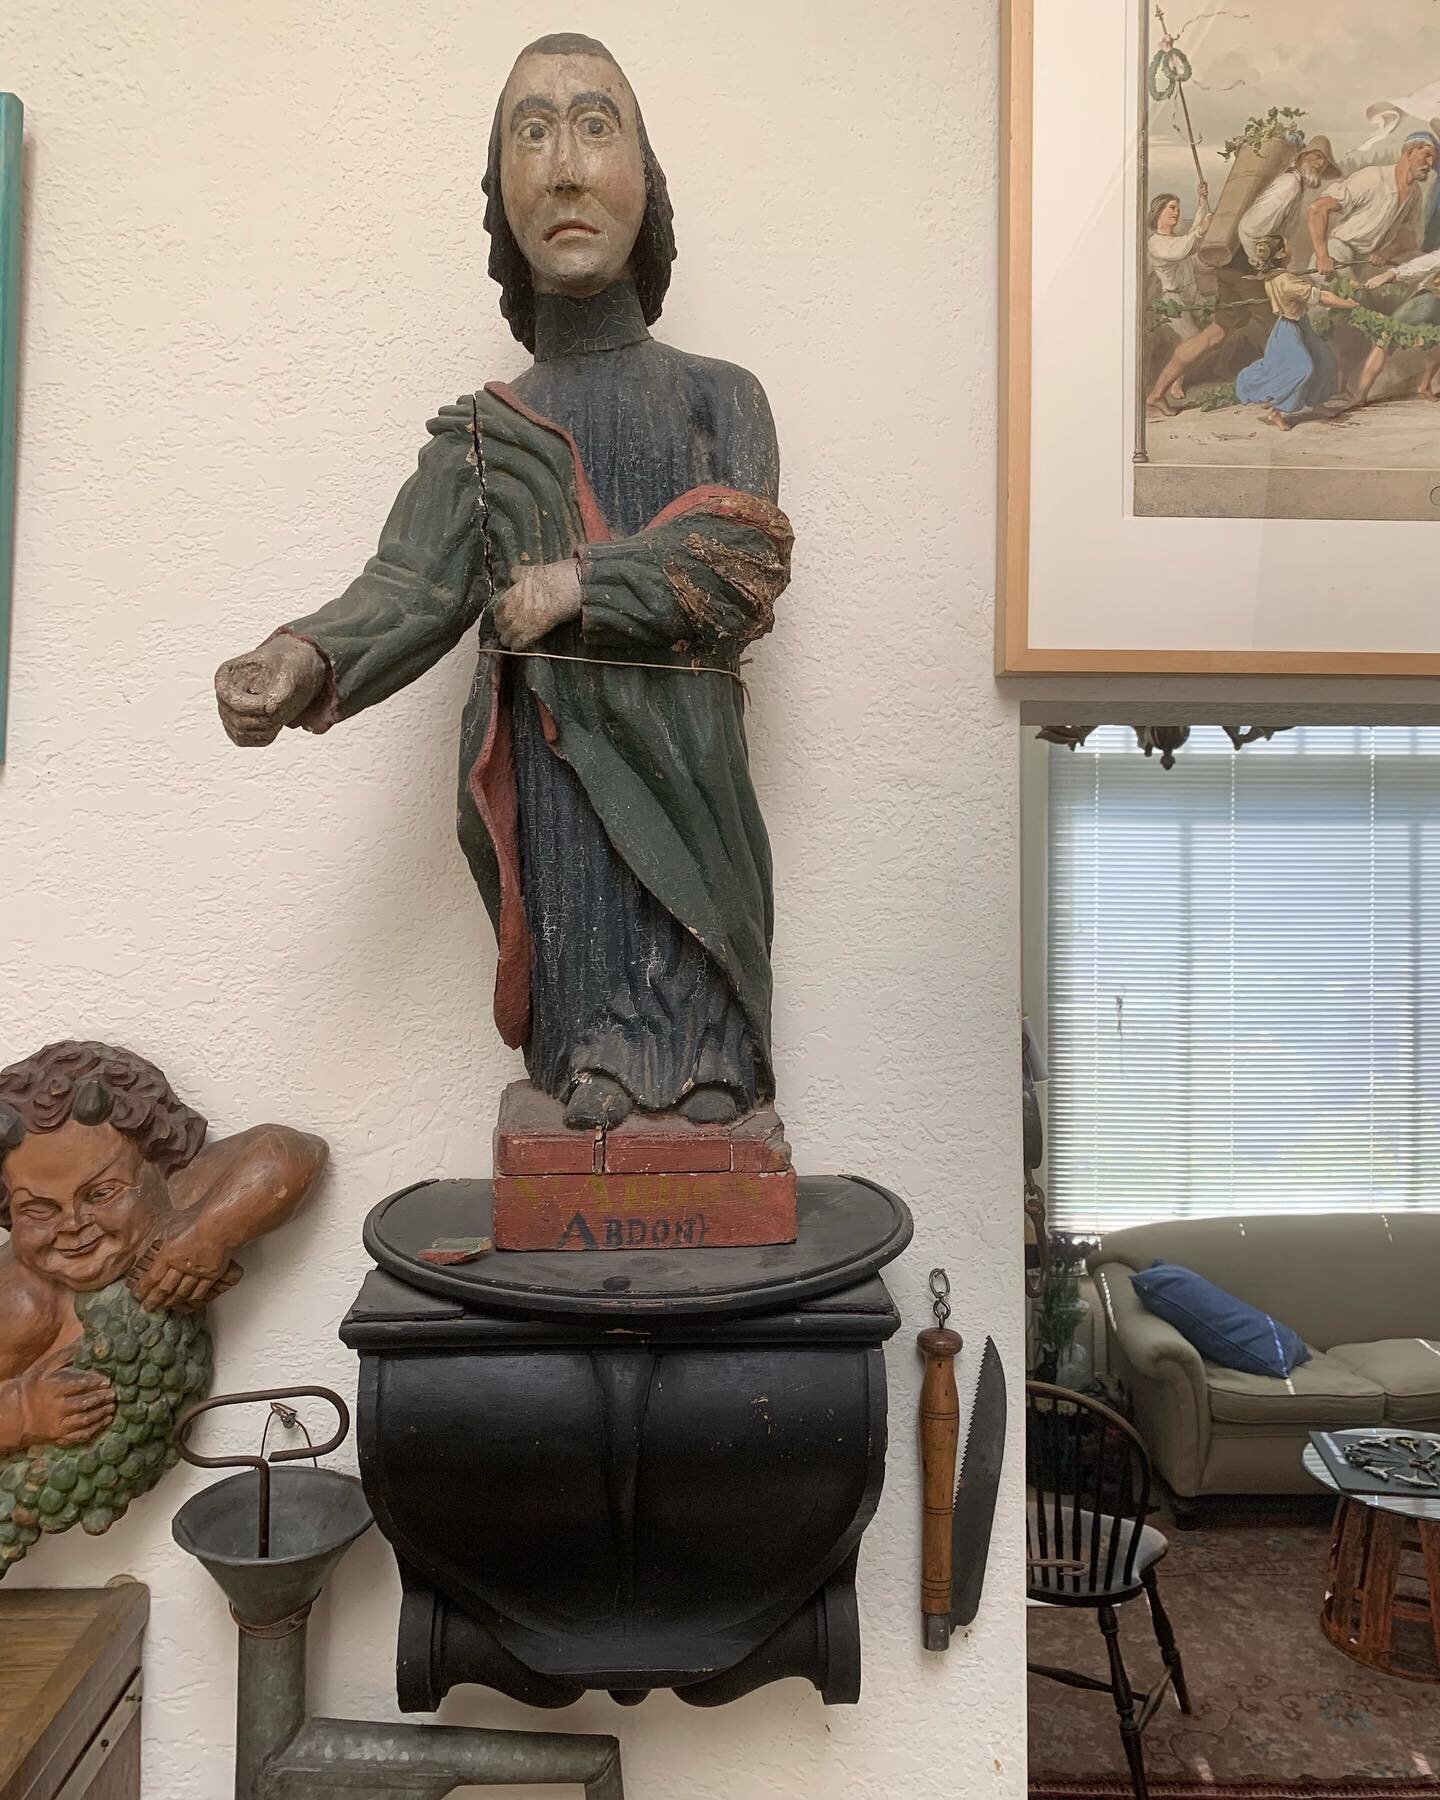 Available. From the collection, a remarkable statue made from wood and papier-m&acirc;ch&eacute;. It is late 1700s and in very good condition. So folksy. He stands 28 &ldquo; and the stand is another 12&rdquo;. Gotta say, St Abdon is quite fabulous! 